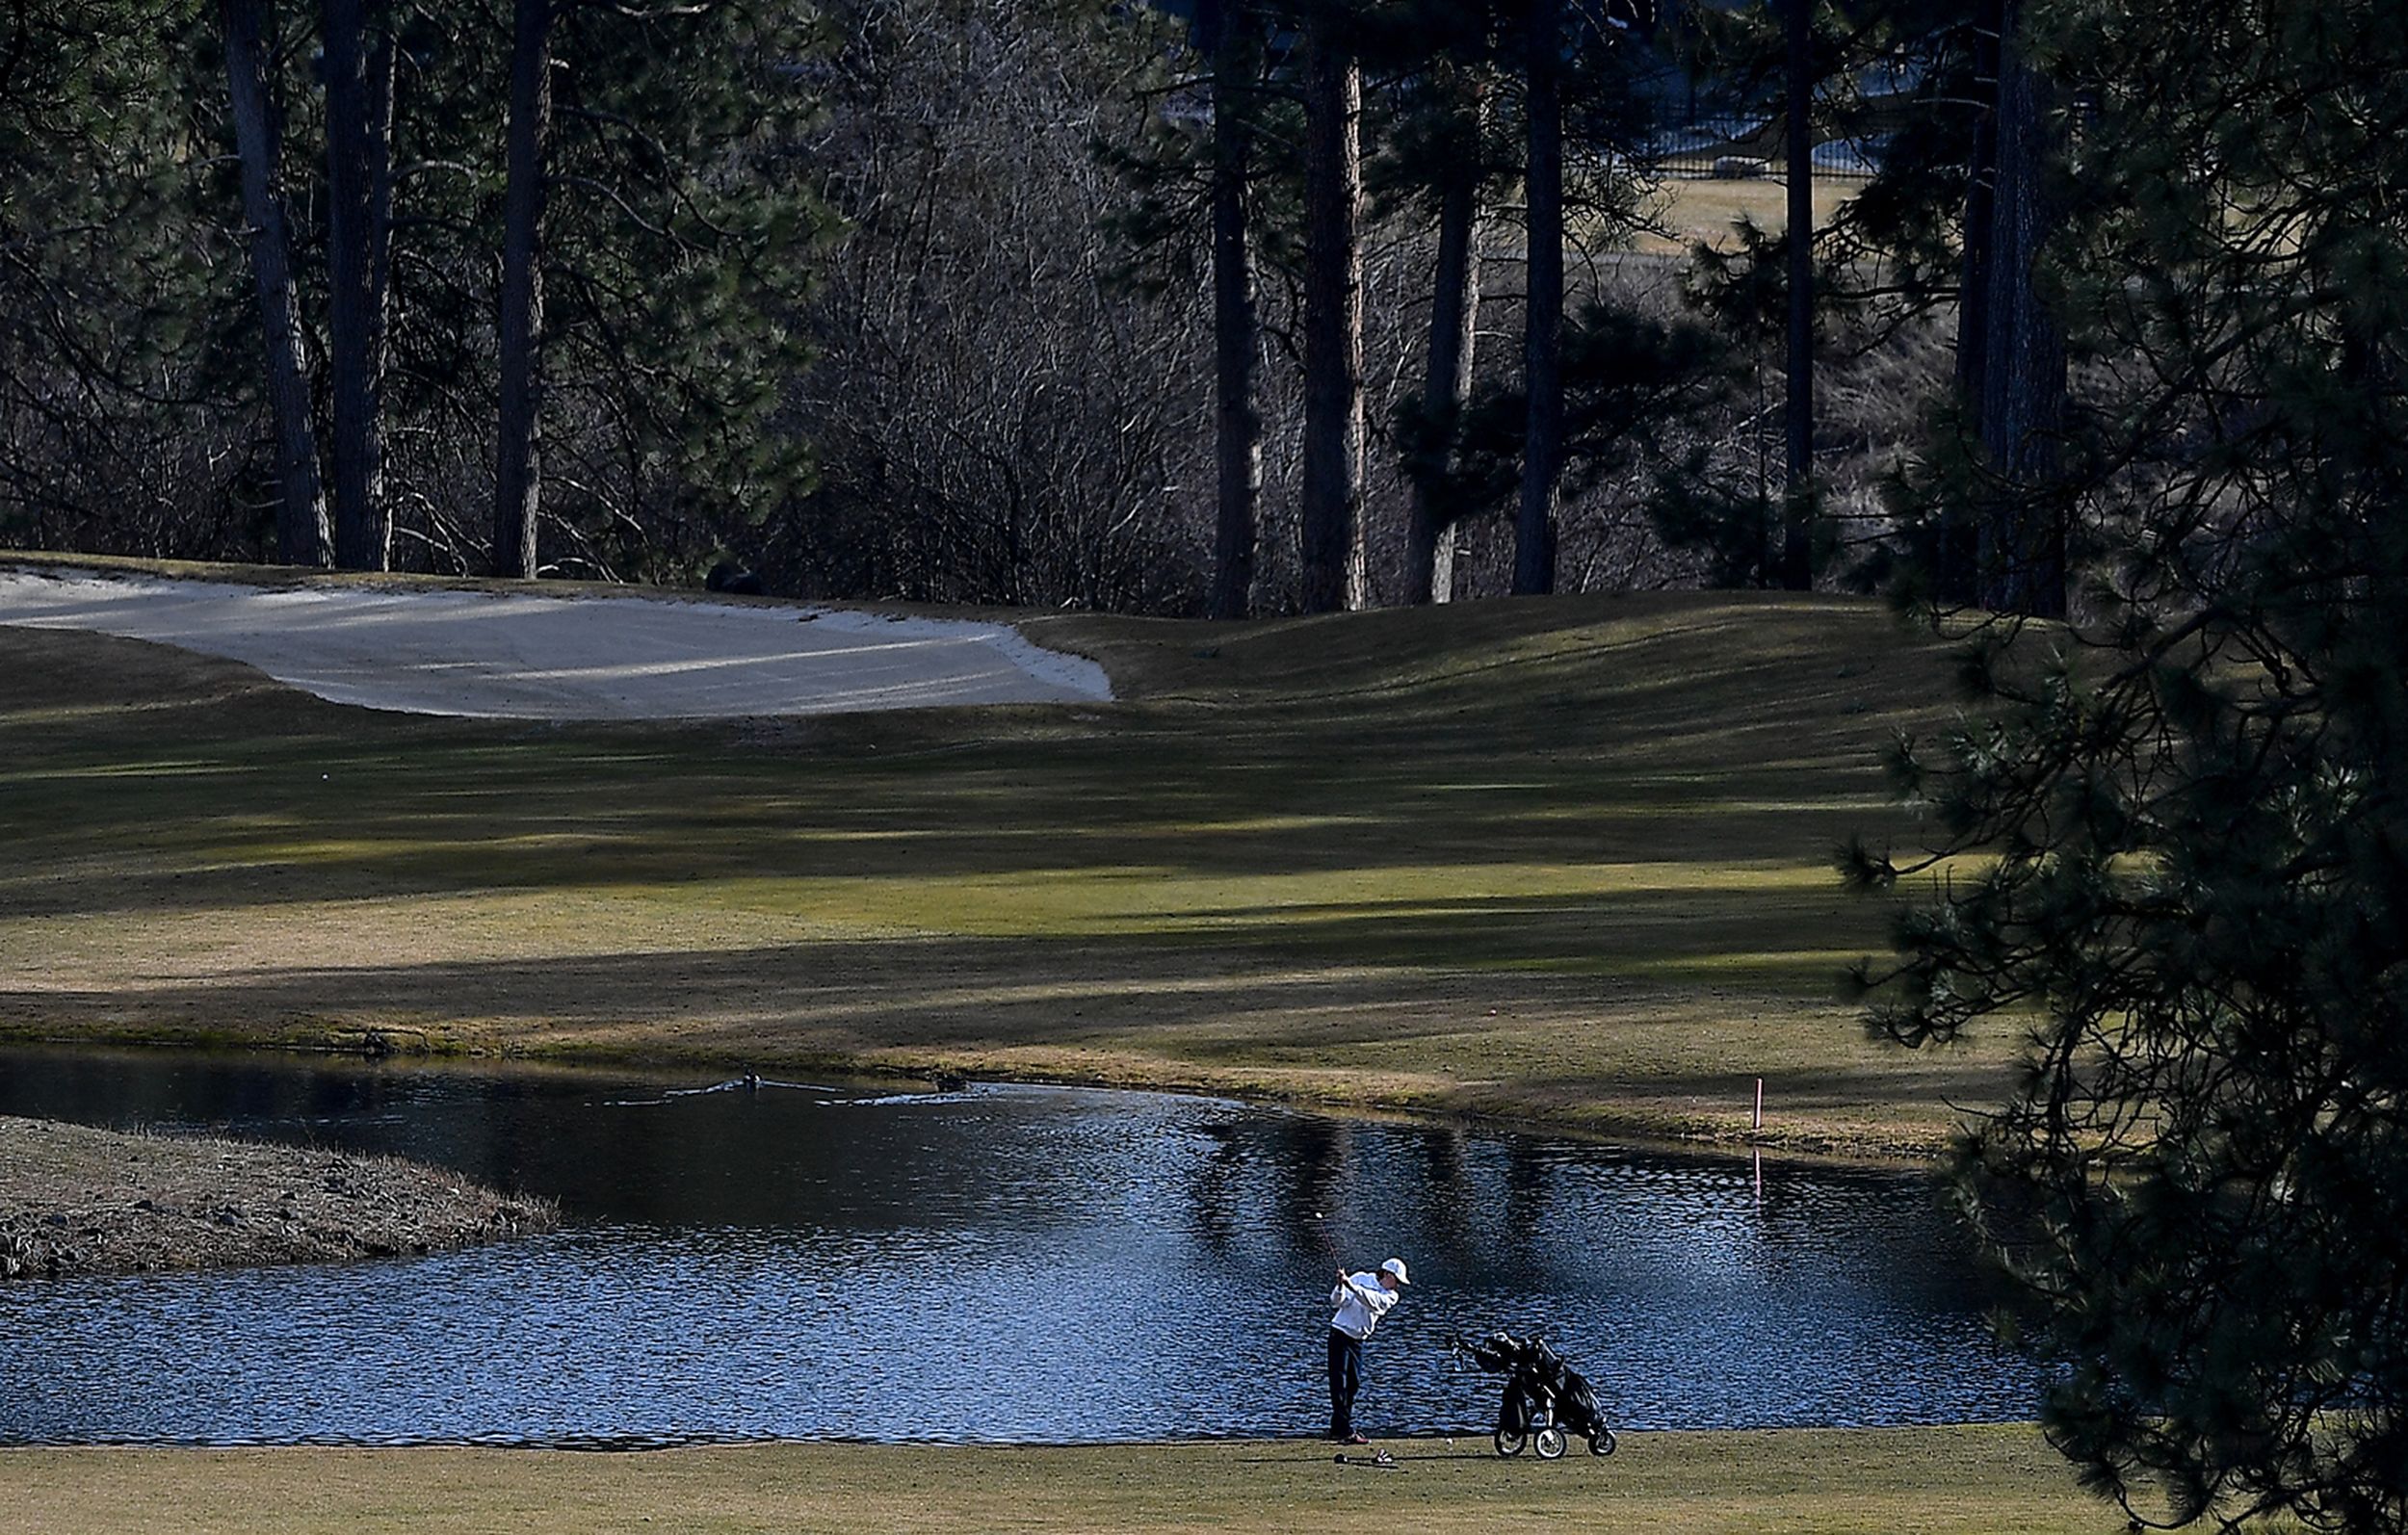 The Creek at Qualchan Golf Course in Spokane opens March 4, 2021